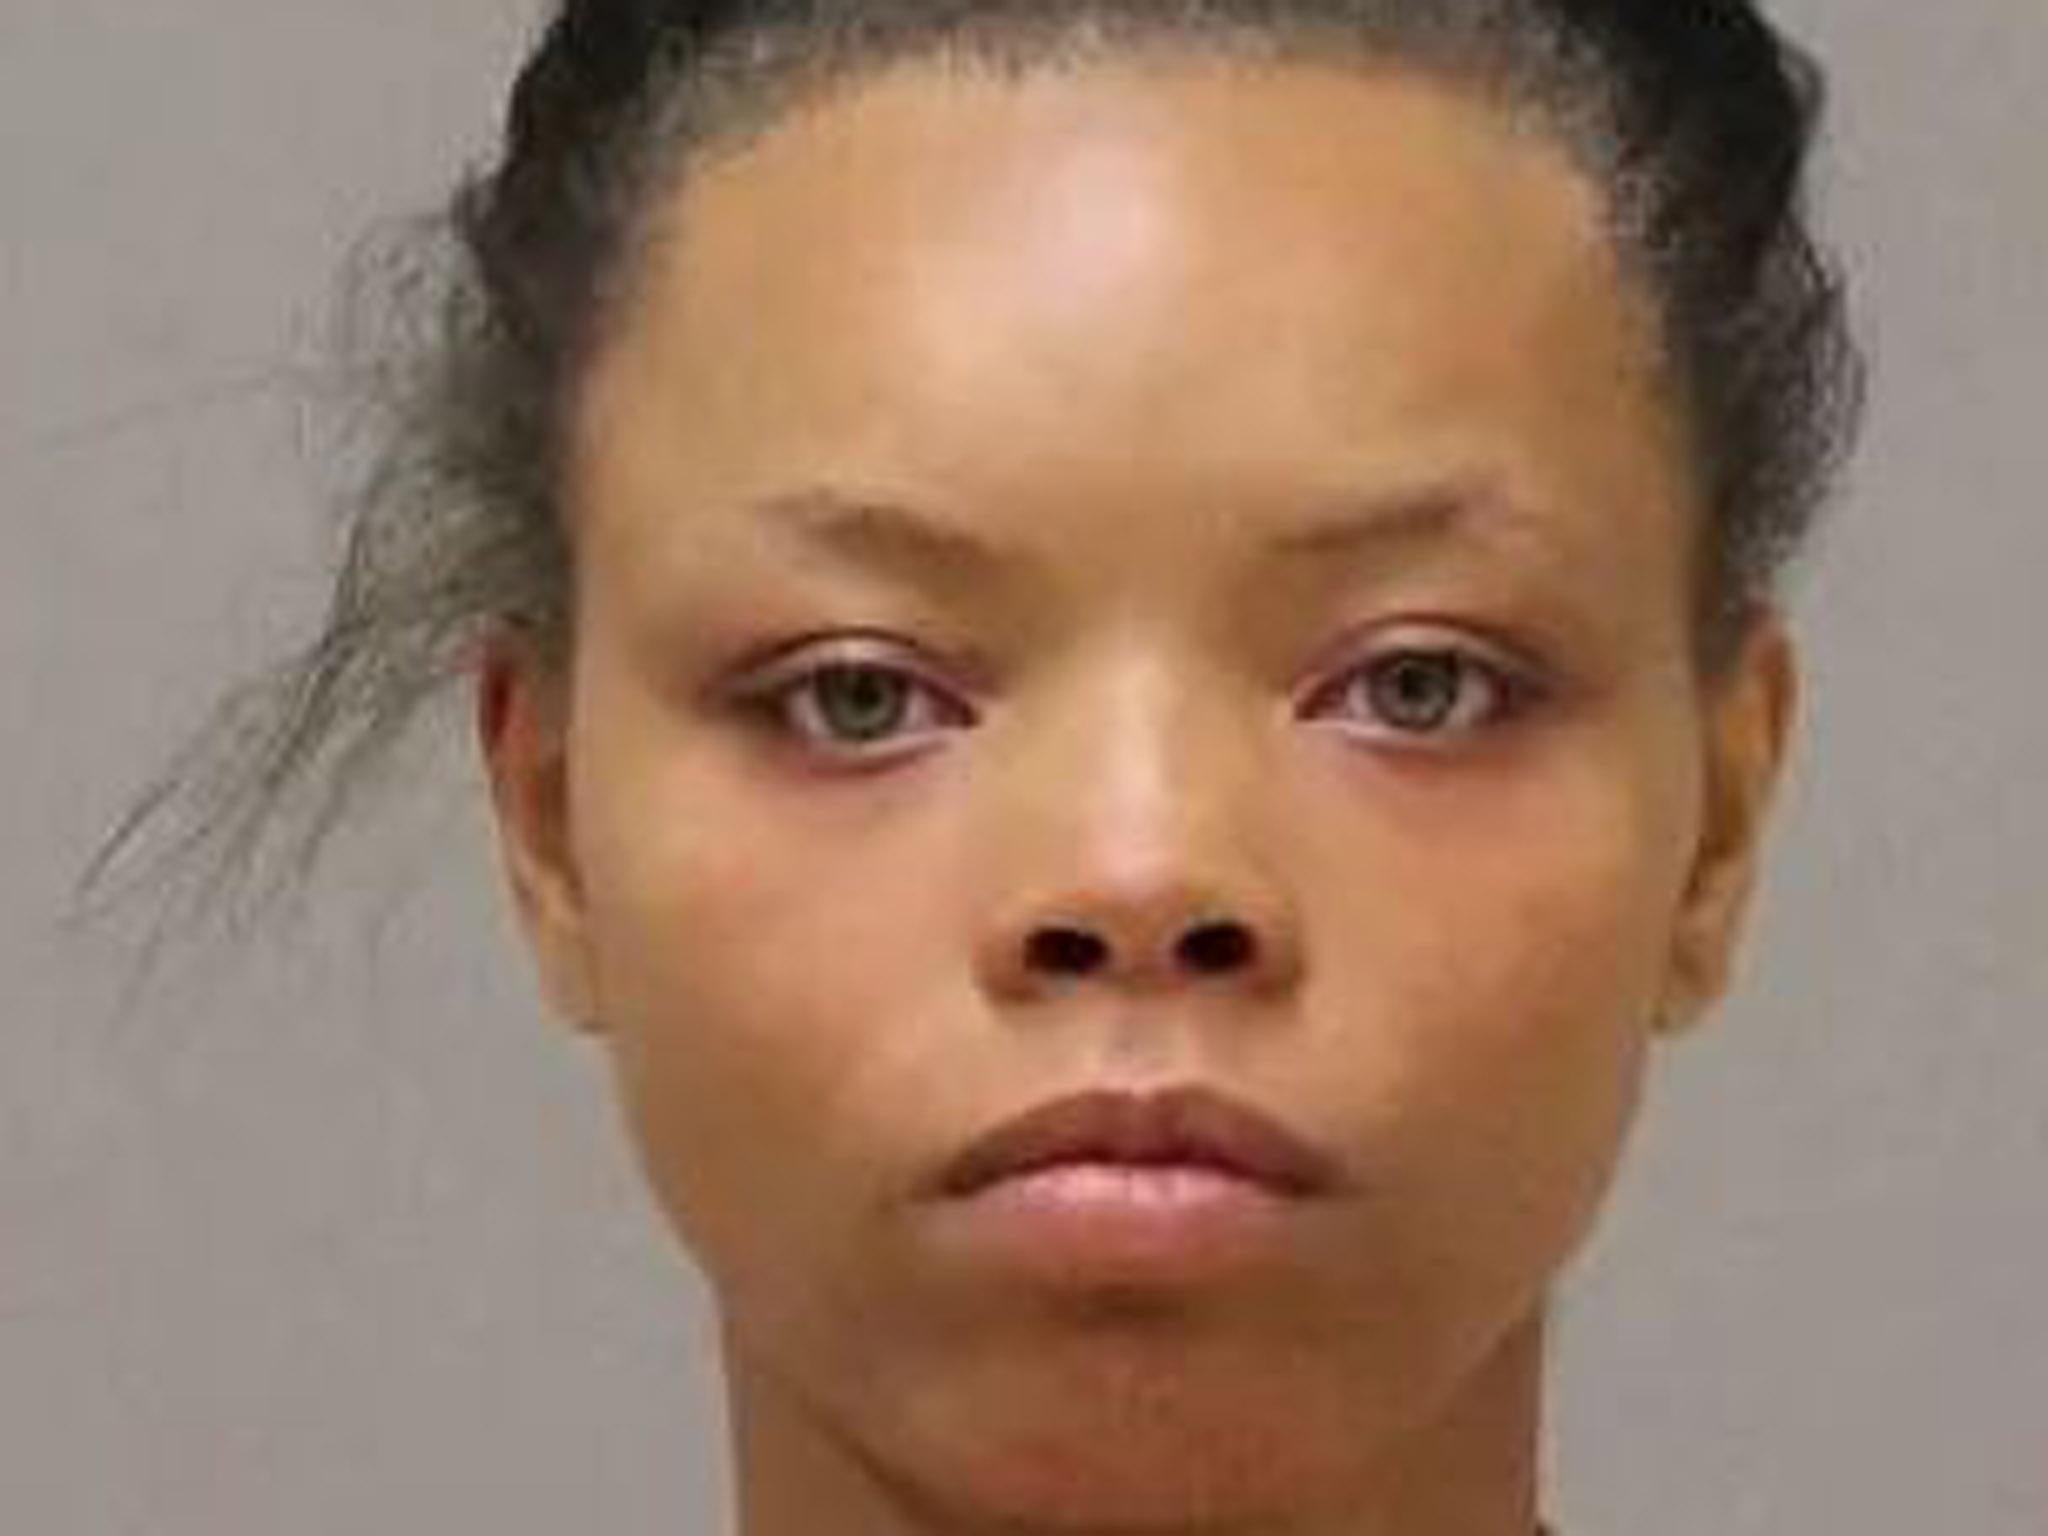 Lovily K Johnson has been remanded in custody and faces two charges over the death of her infant son